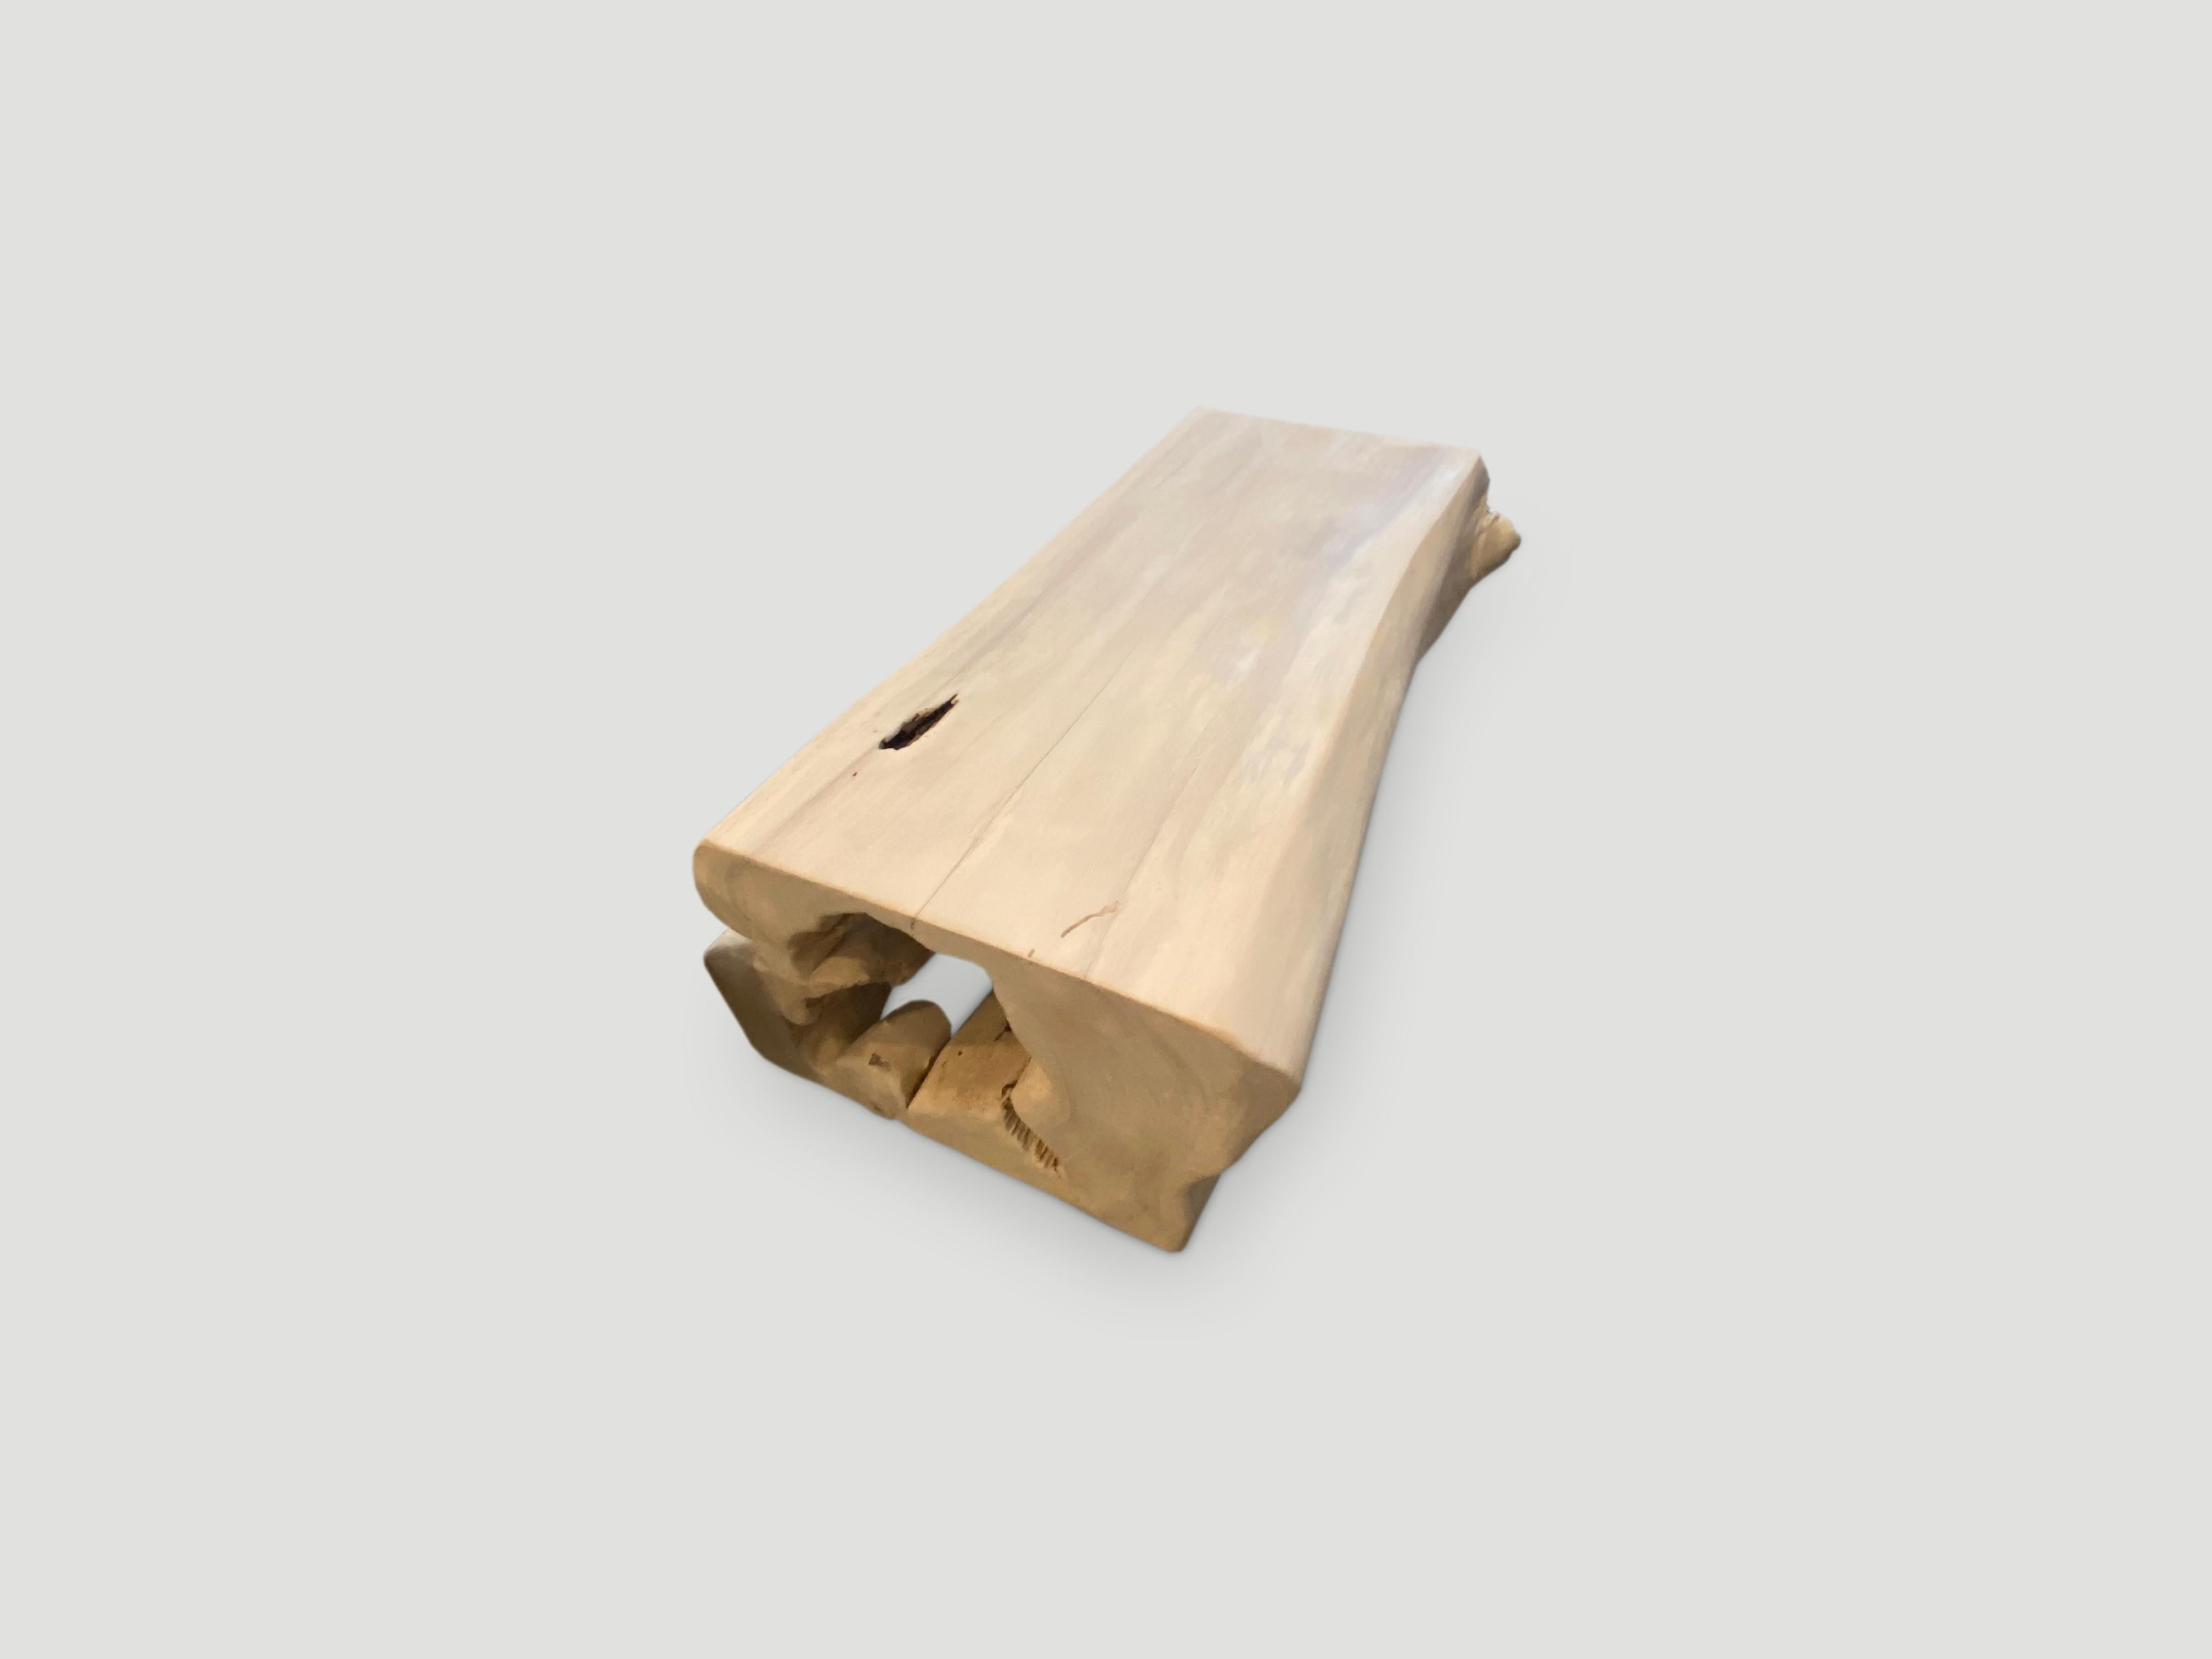 Contemporary Andrianna Shamaris St. Barts Reclaimed Teak Wood Coffee Table or Bench